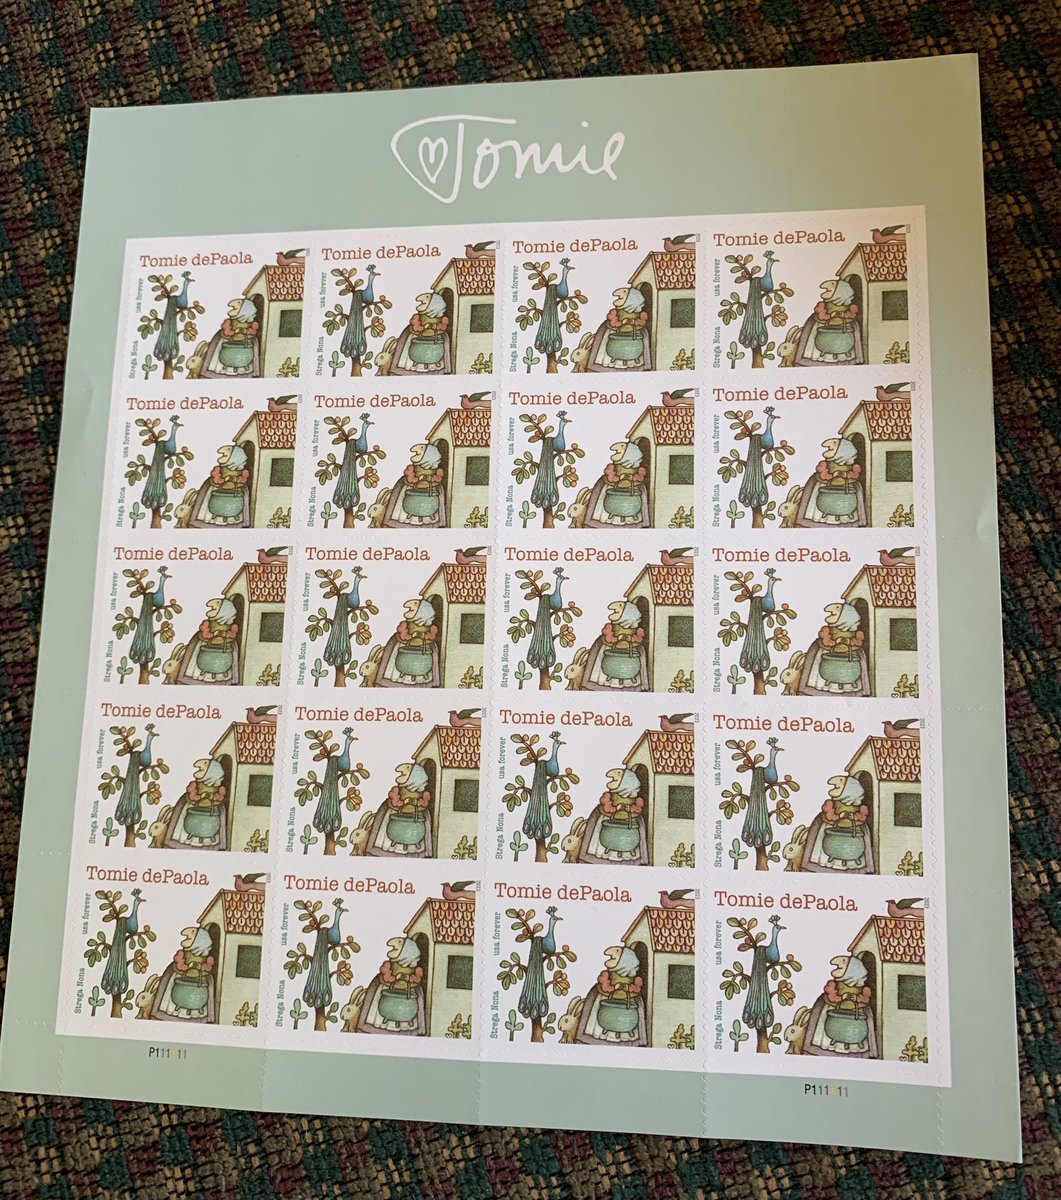 Got some Tomie dePaola stamps today… https://t.co/hFonJgoKoa